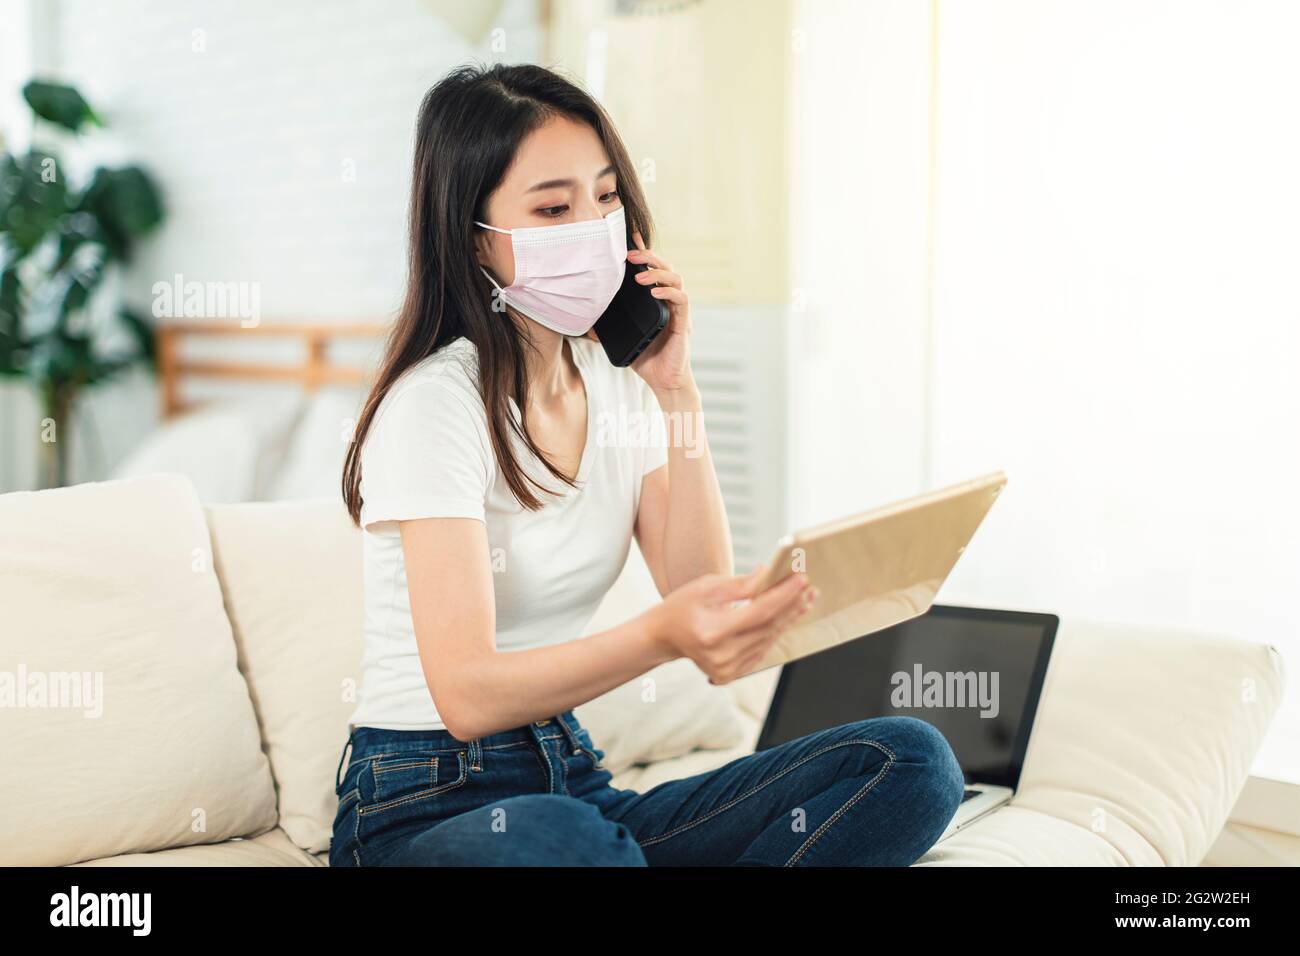 Young woman working at home, wearing a mask to protect herself, sitting on the sofa using a laptop to telecommute, and talking on the phone while watc Stock Photo